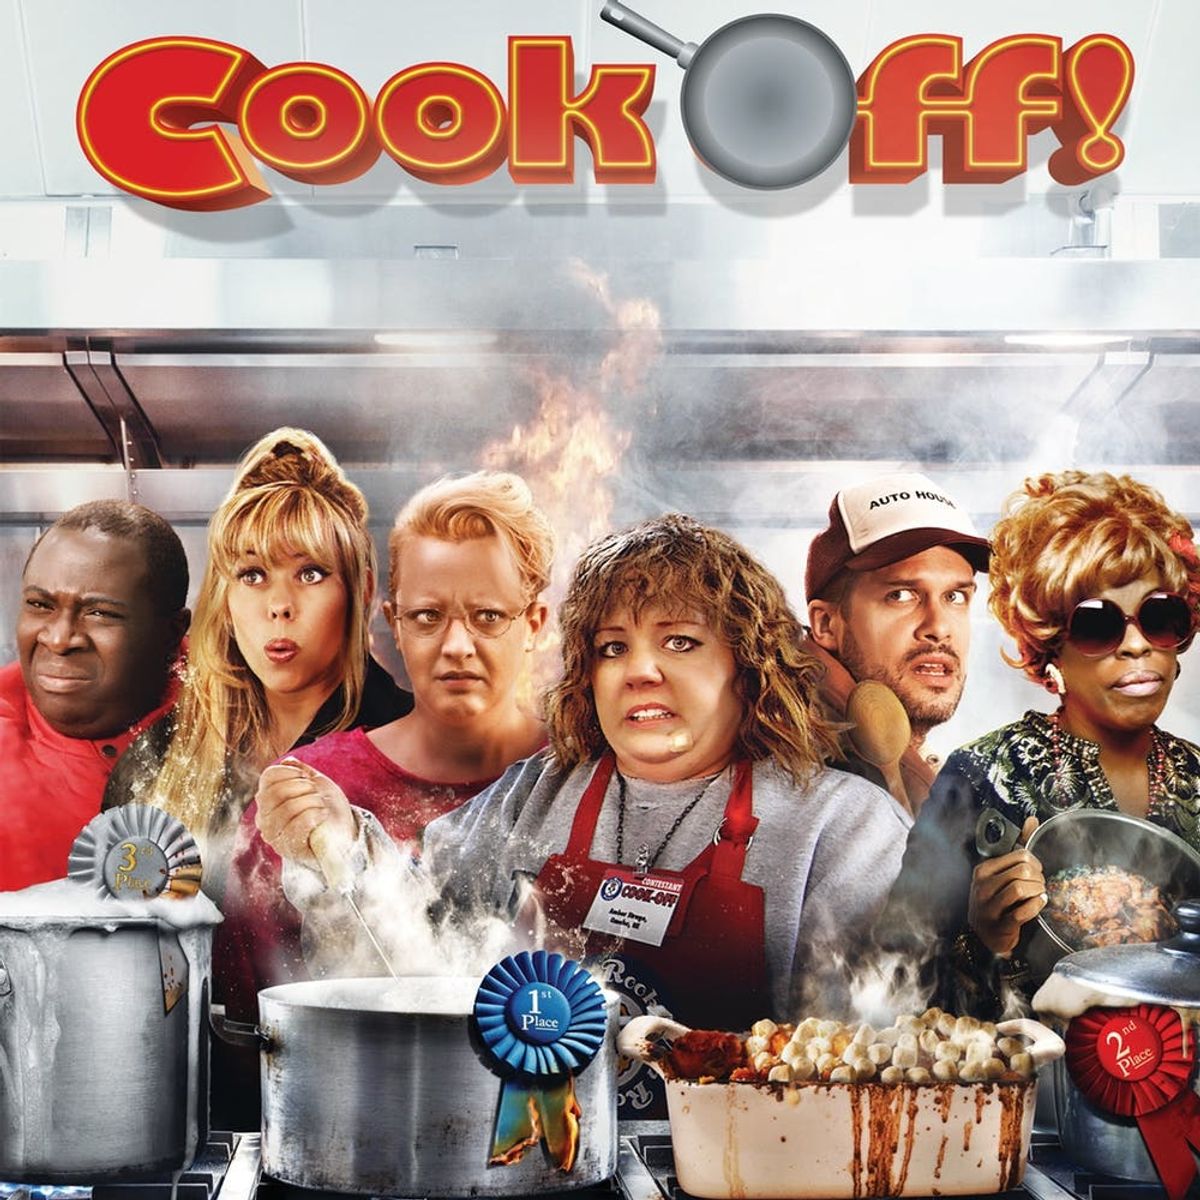 Filmmaker Cathryn Michon Reveals the Story Behind Long-Lost Melissa McCarthy Film “COOK OFF!” — and Being a Woman in Hollywood